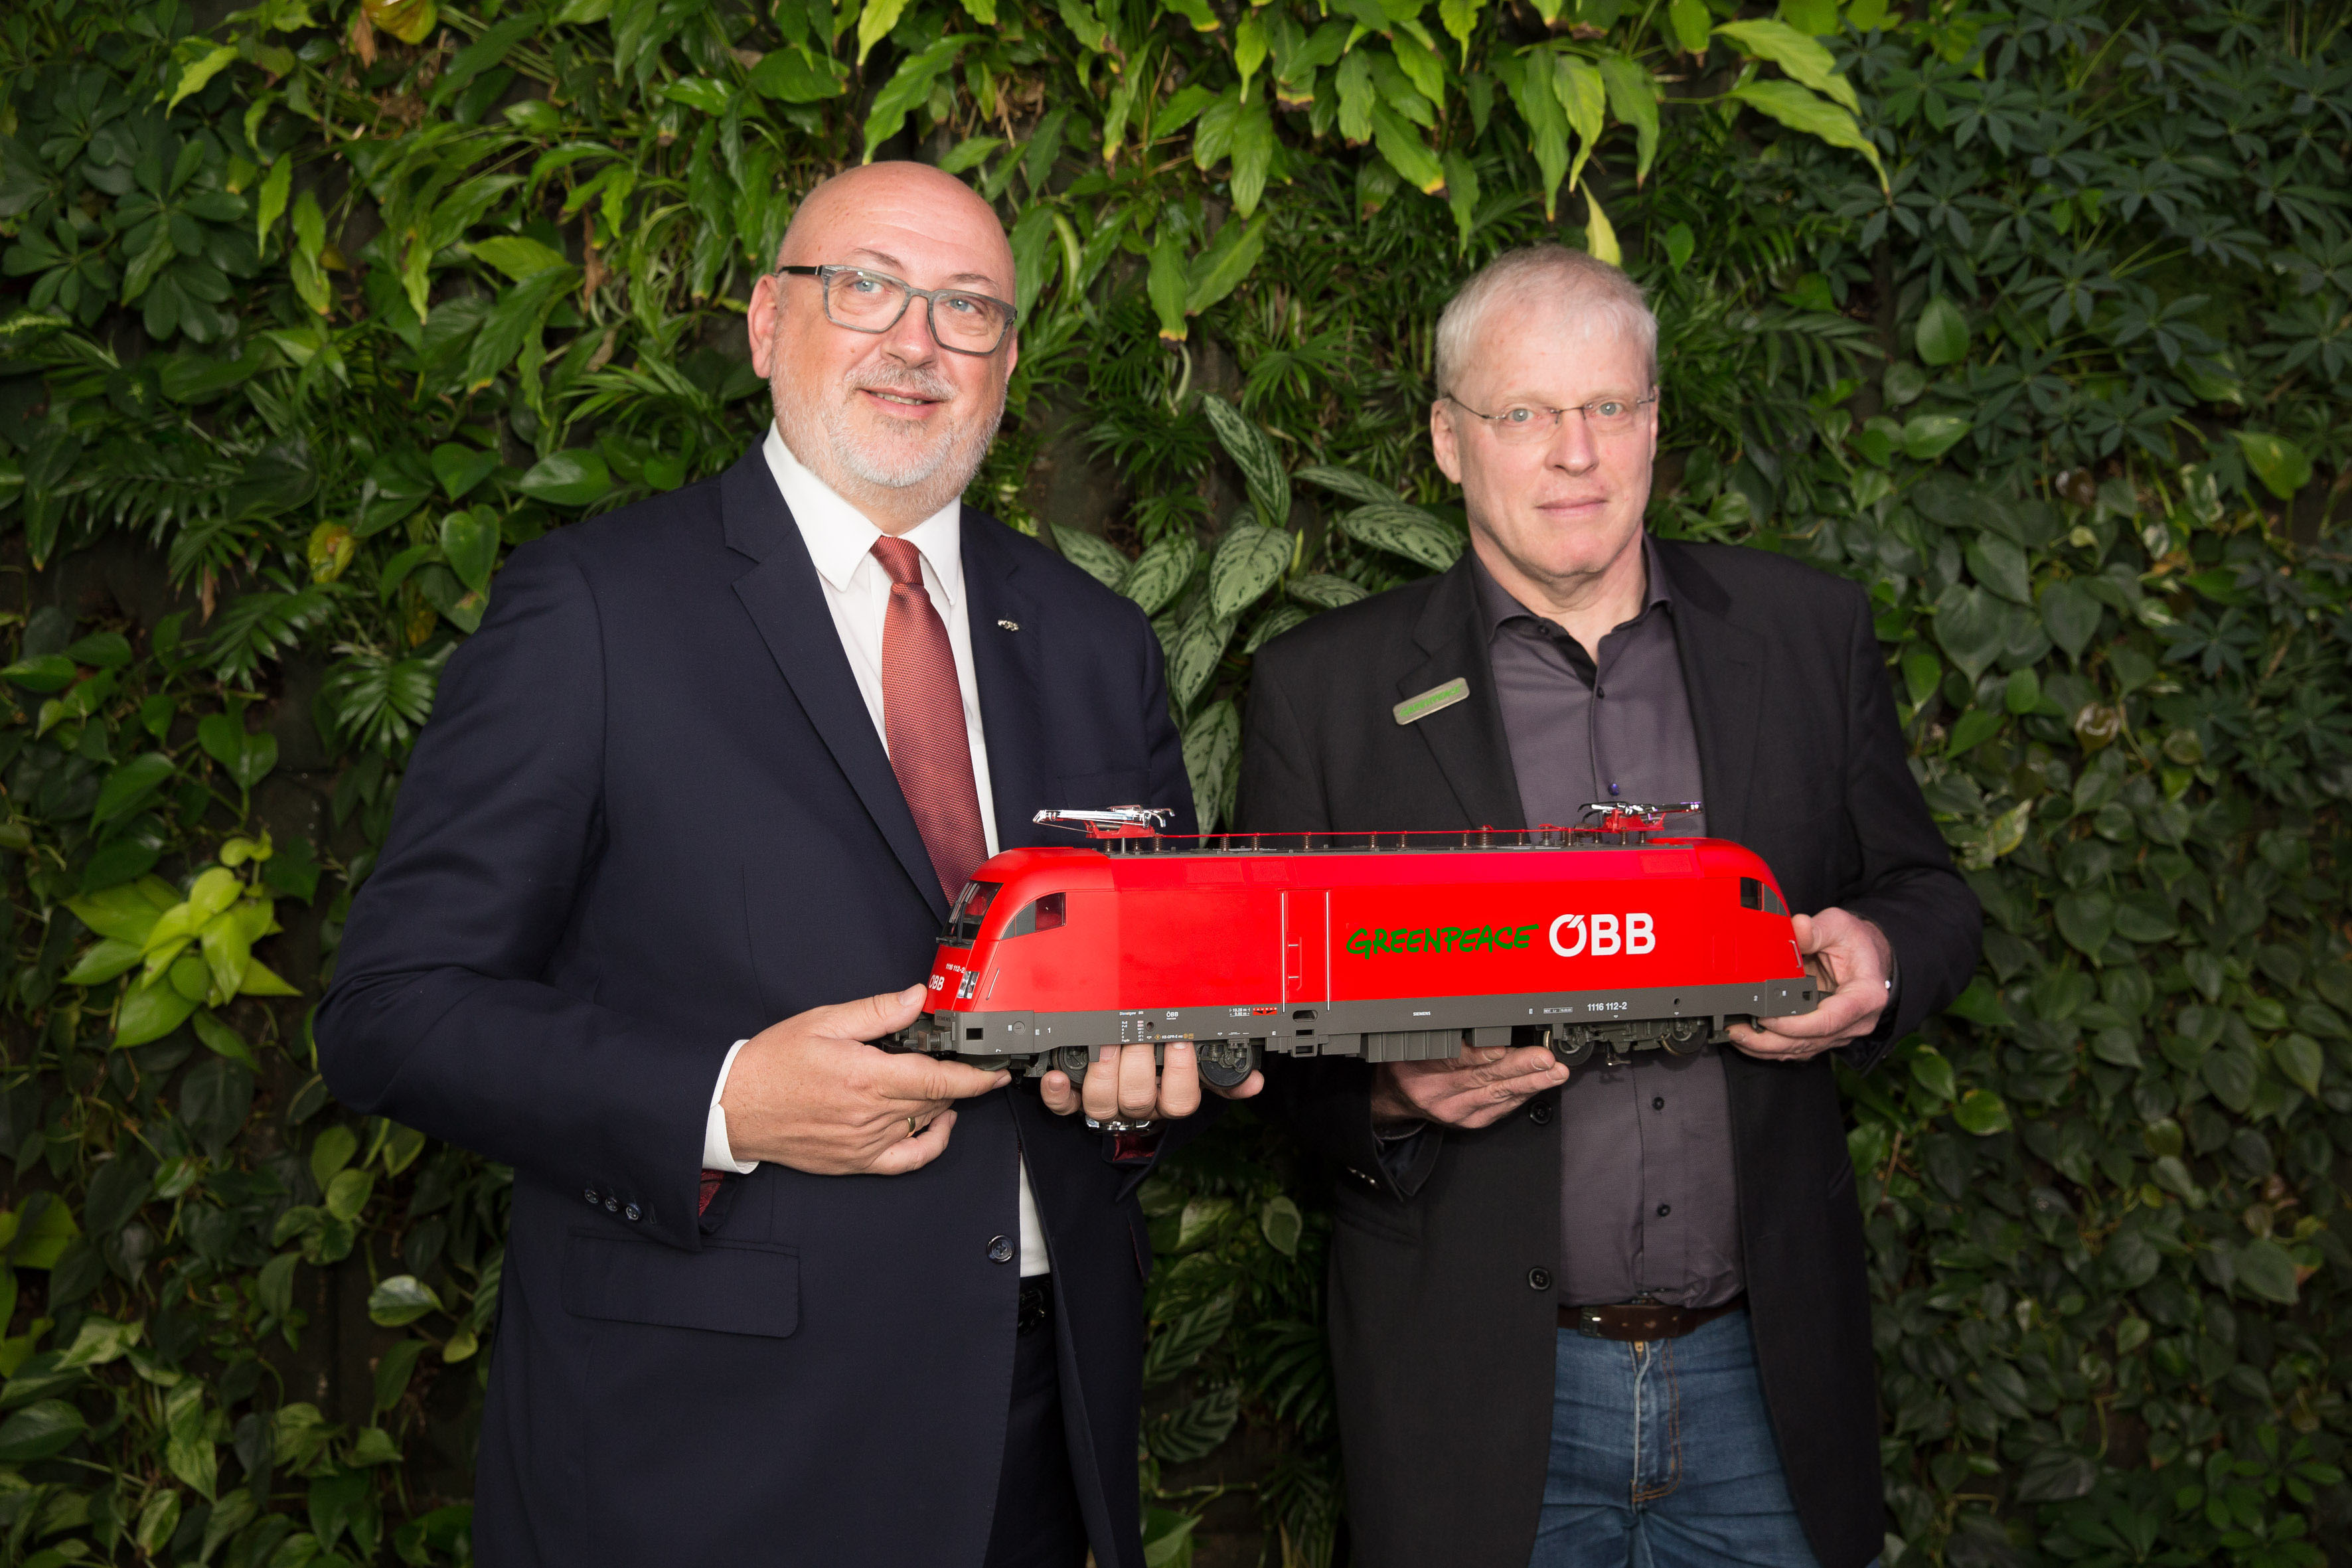 ÖBB aims to operate 100% CO2-neutrally in the long term